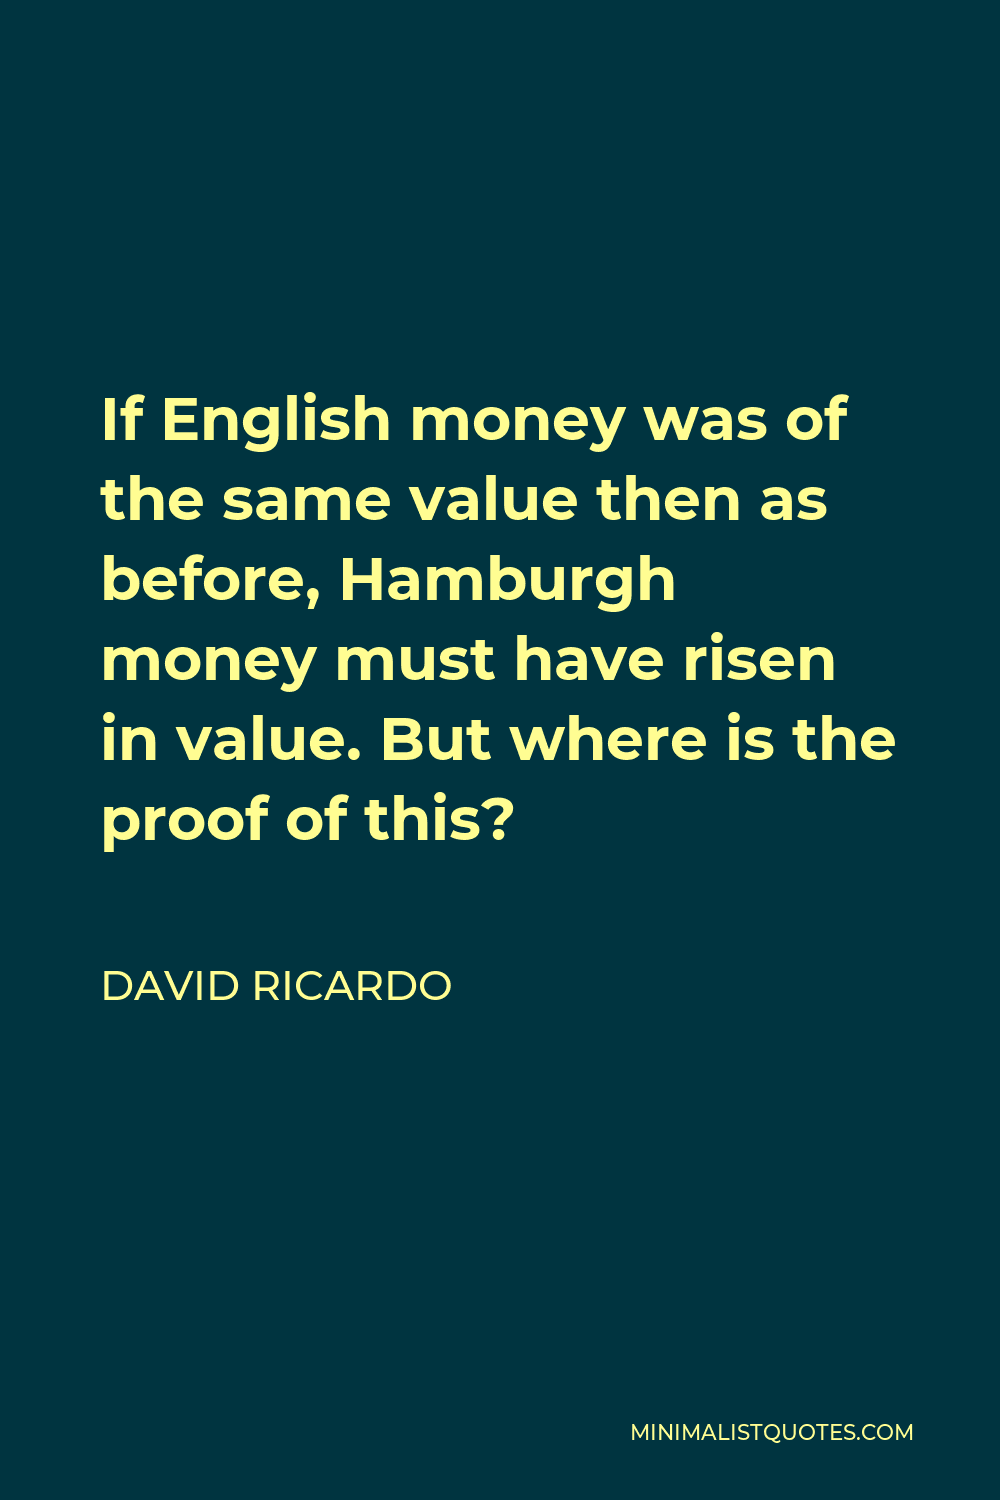 David Ricardo Quote - If English money was of the same value then as before, Hamburgh money must have risen in value. But where is the proof of this?